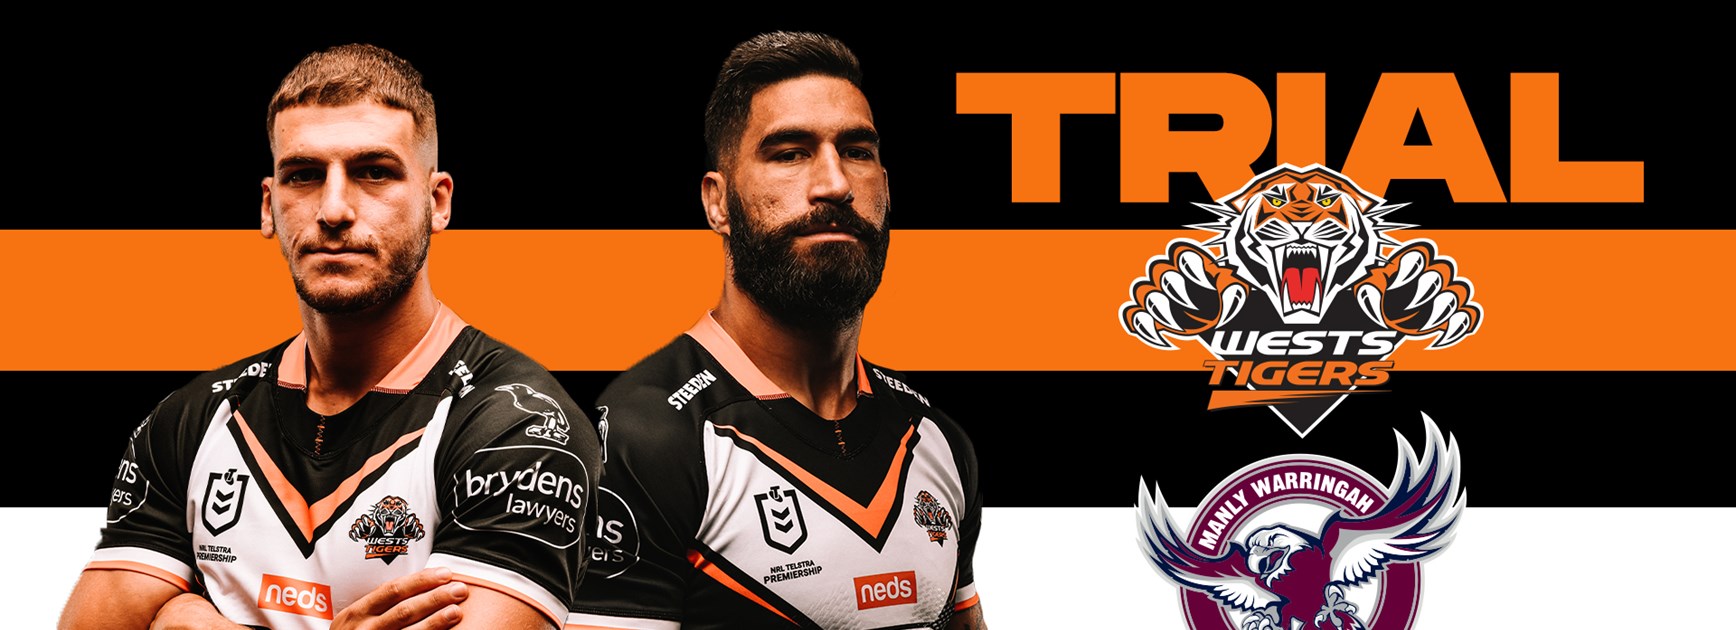 Tickets on sale for Leichhardt Oval trial match